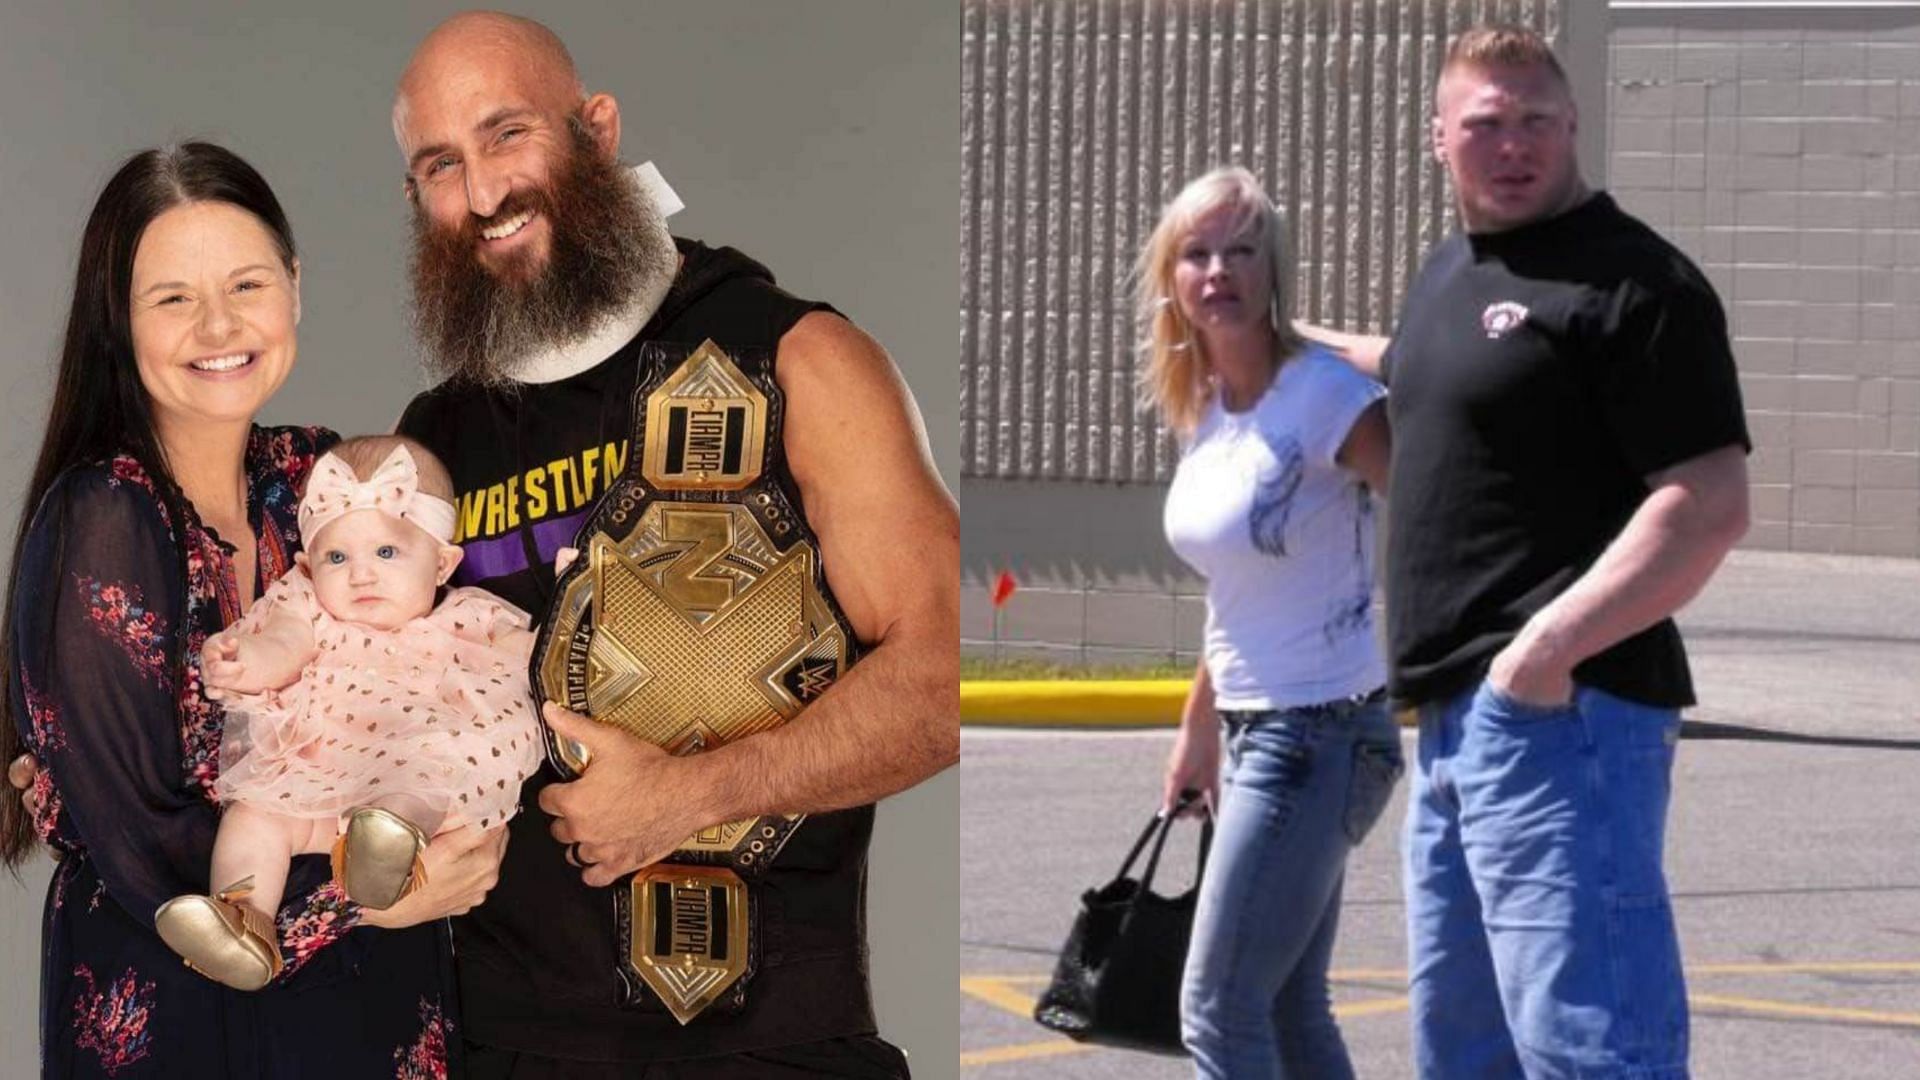 Ciampa with his wife, Jessie Ward (left) and Brock Lesnar with his wife, Sable (right)